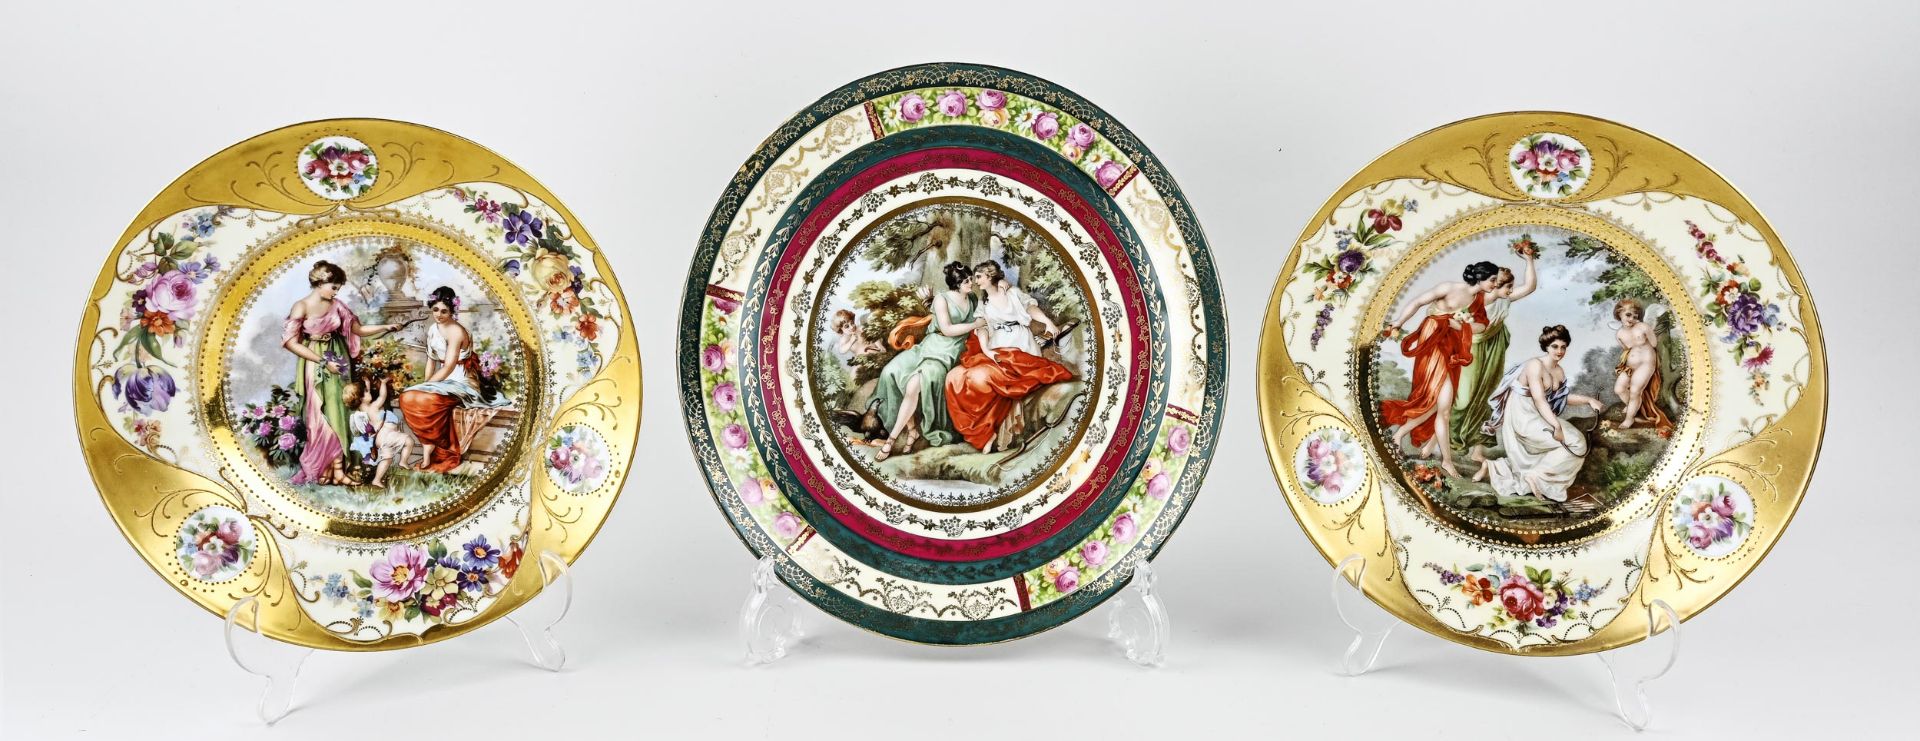 Three antique French plates, 1900